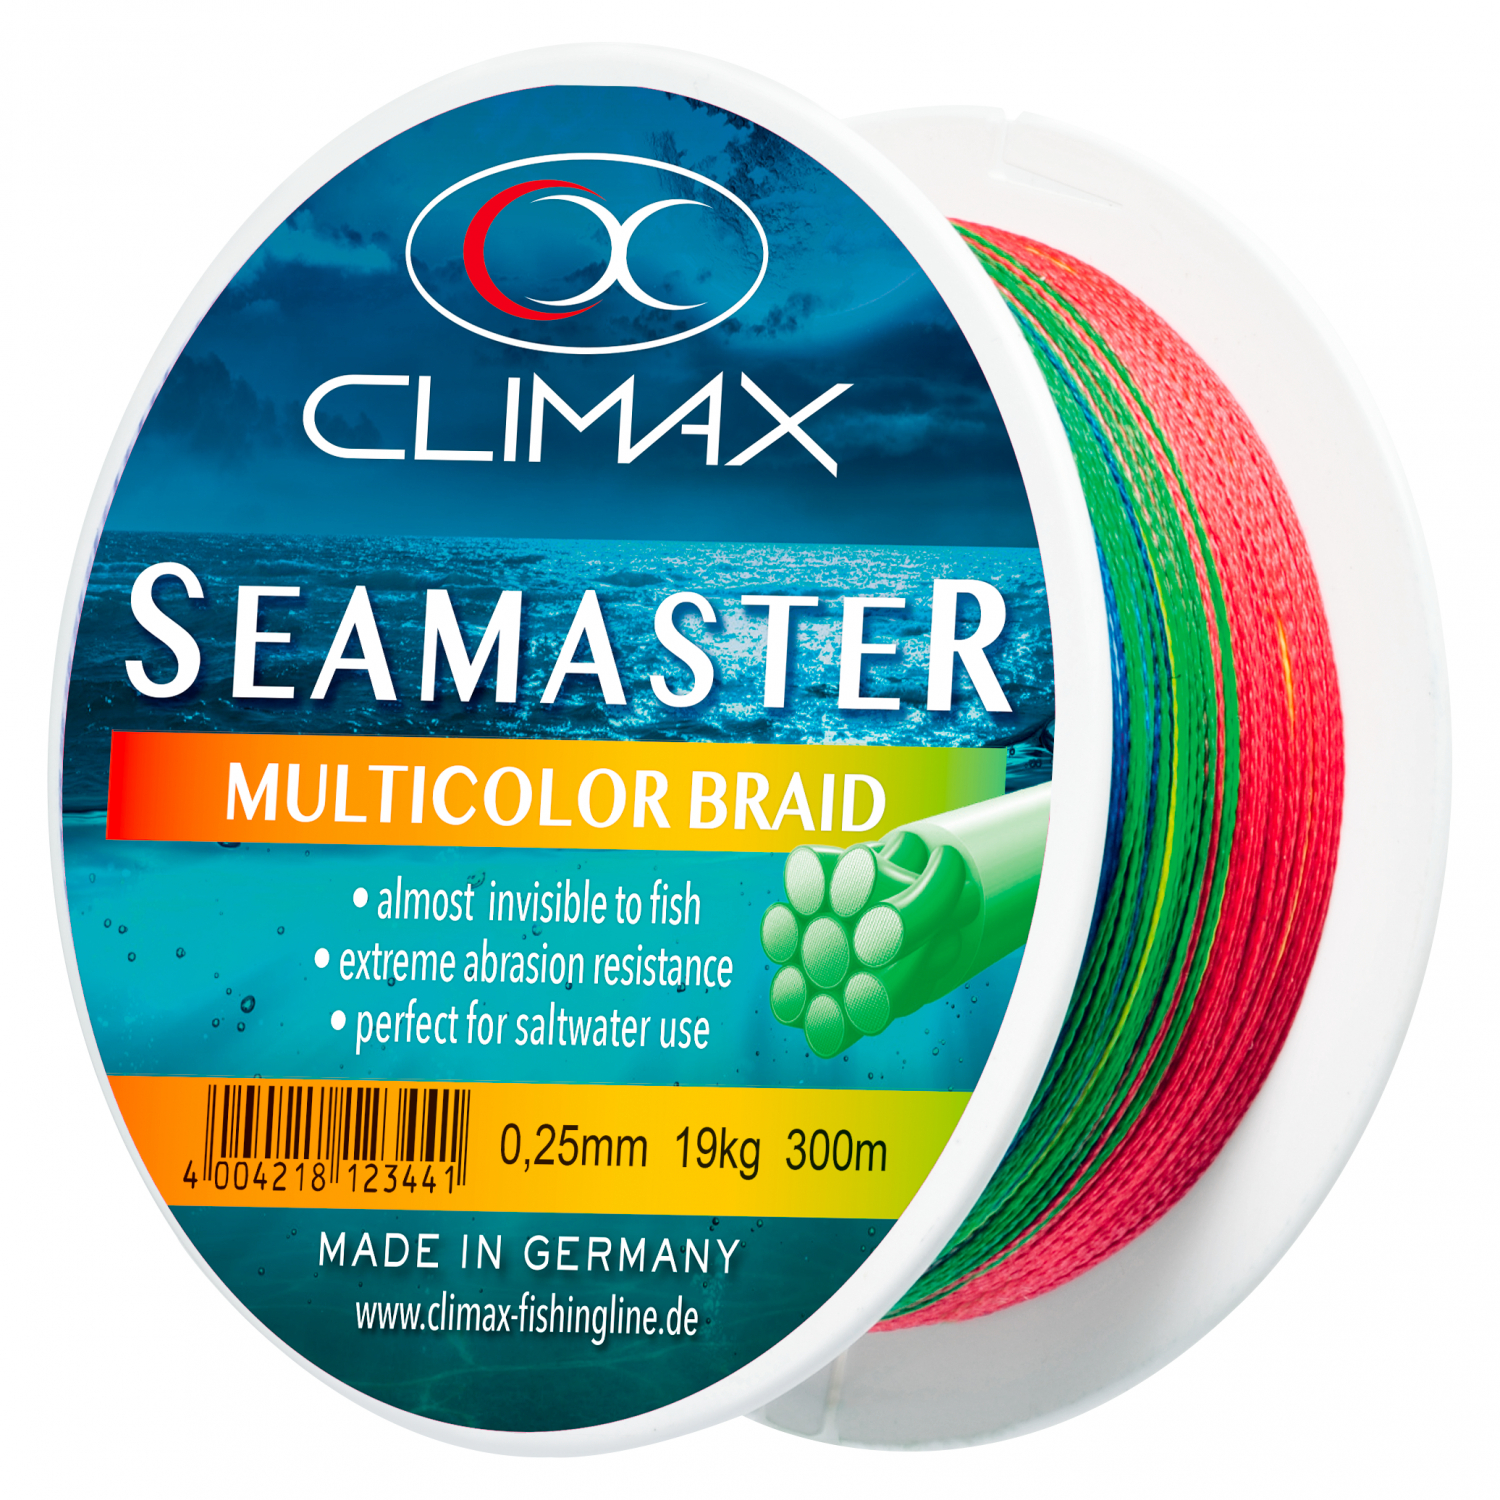 Climax Leader Fishing Line Seamaster Fluorocarbon (50 m) at low